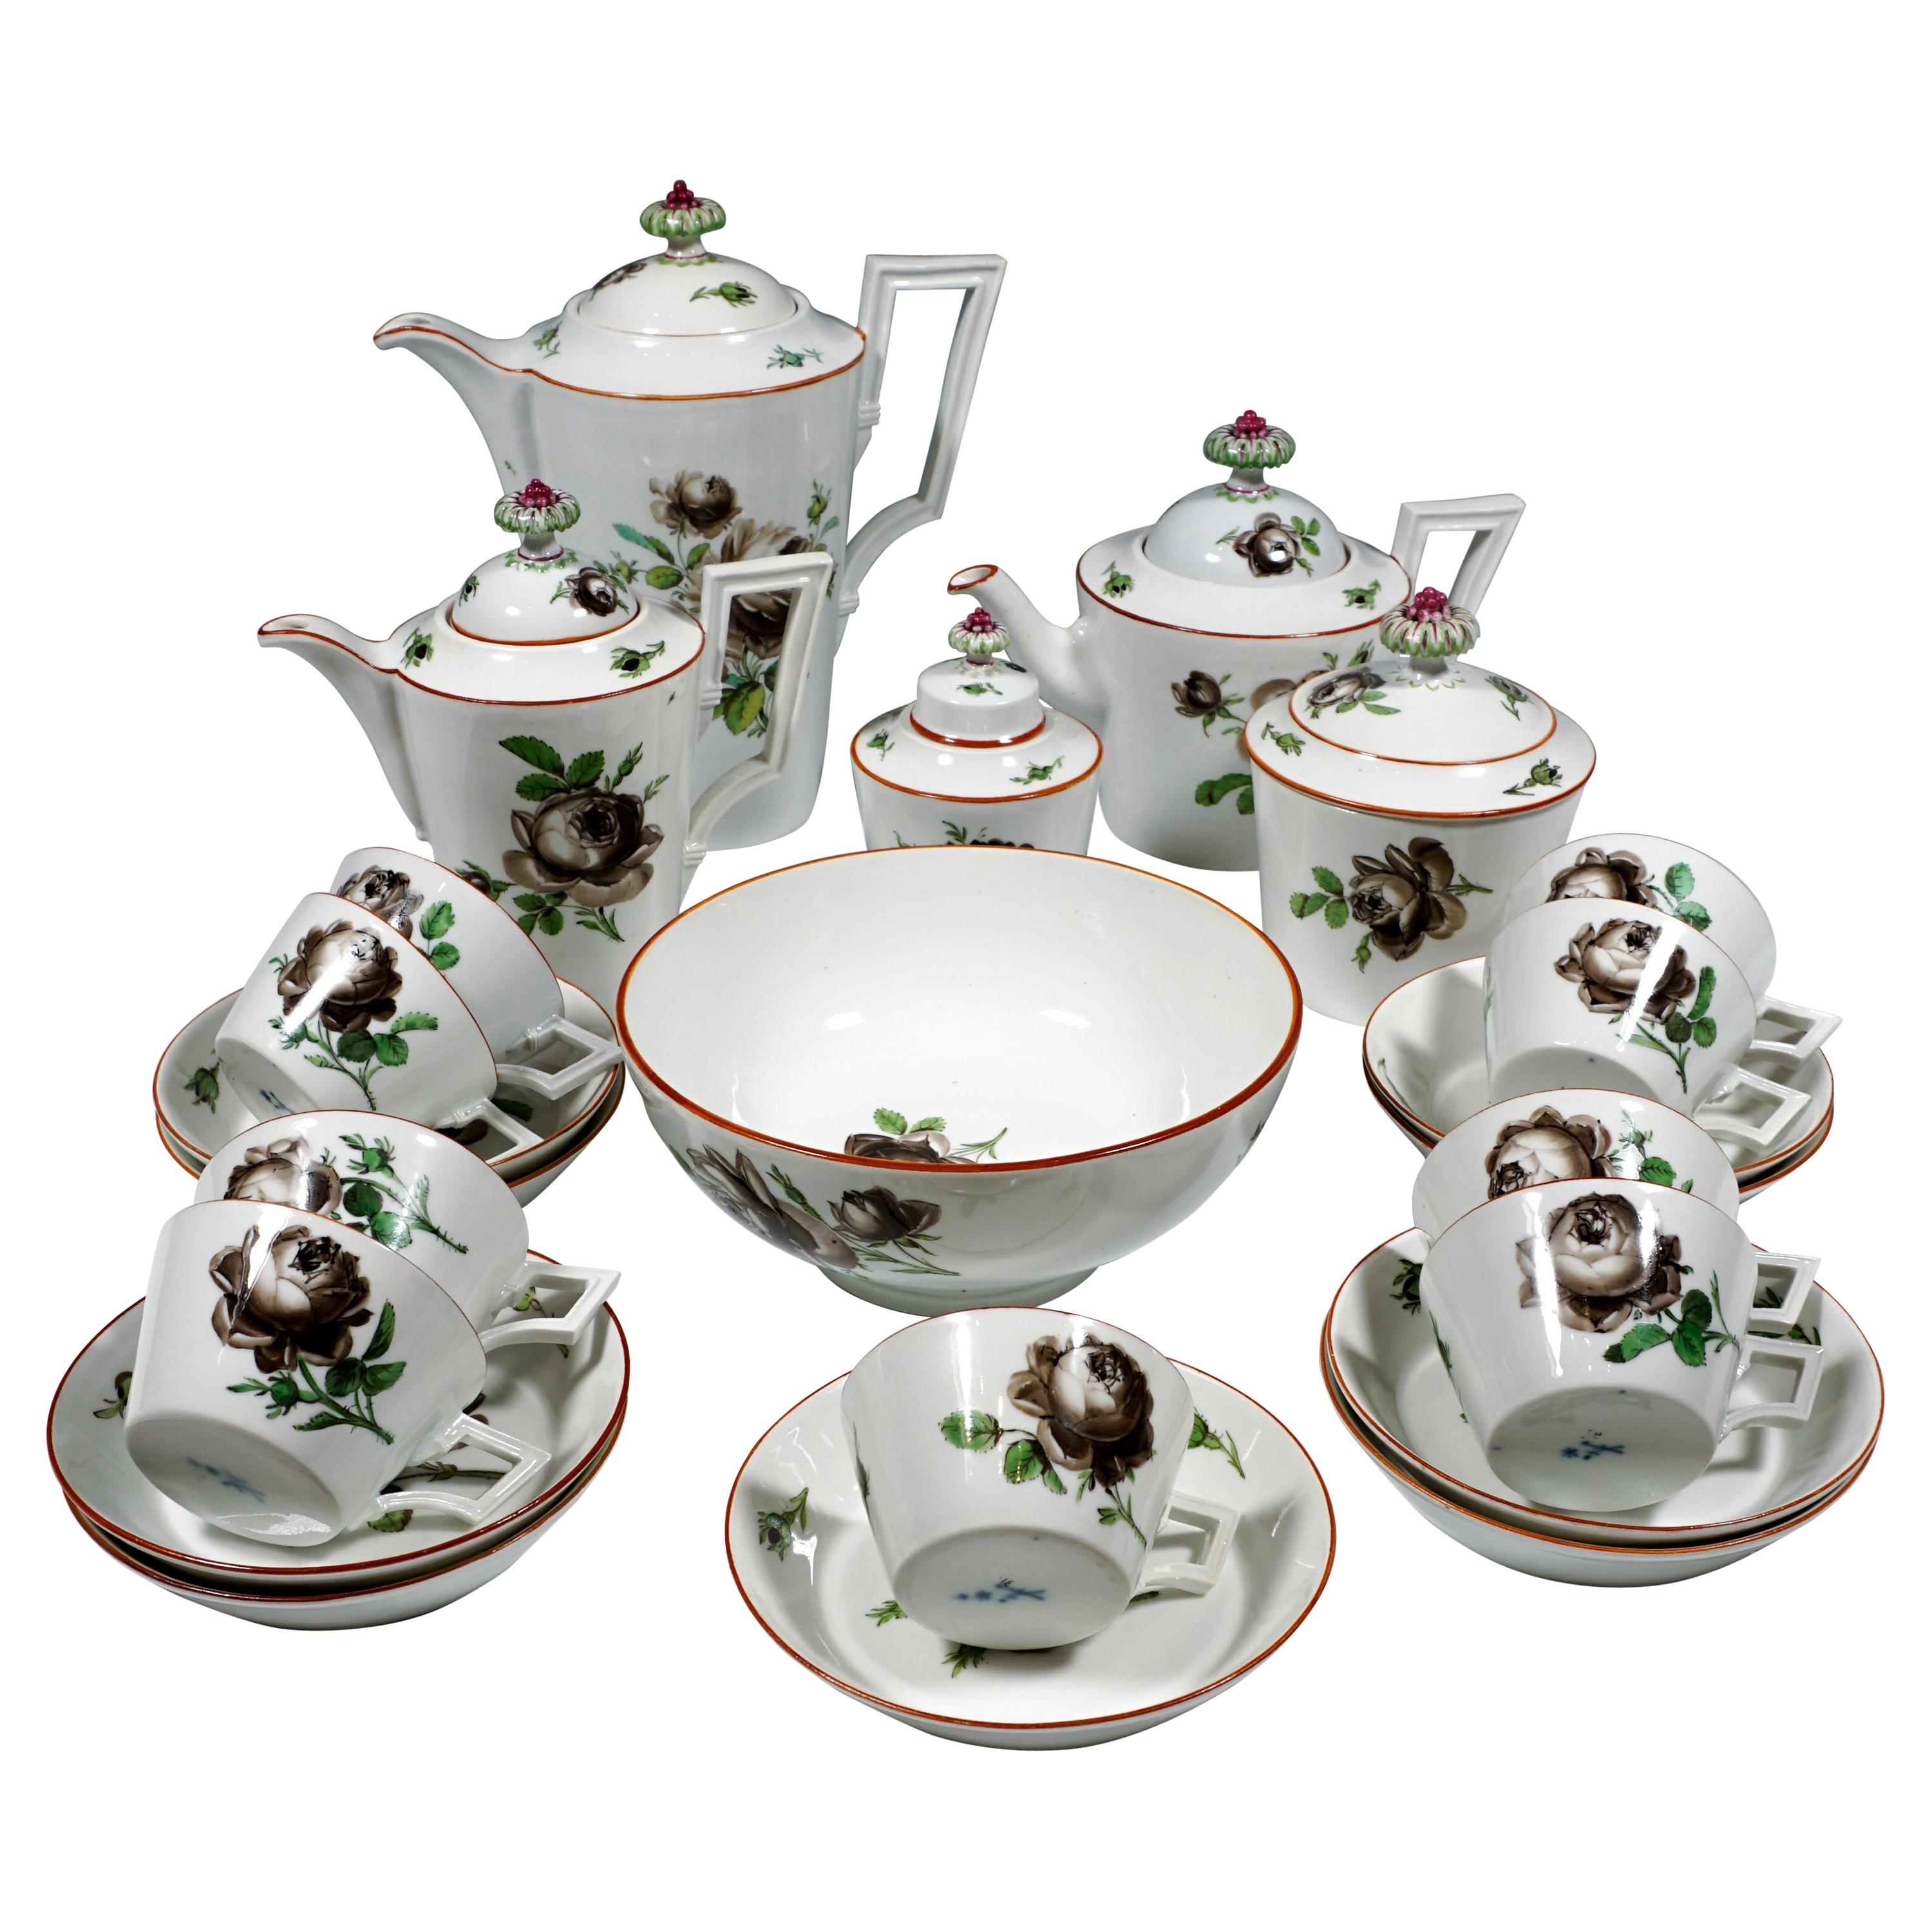 18th Century Meissen Coffee & Tea Set for 9 Persons with Black Rose Decor